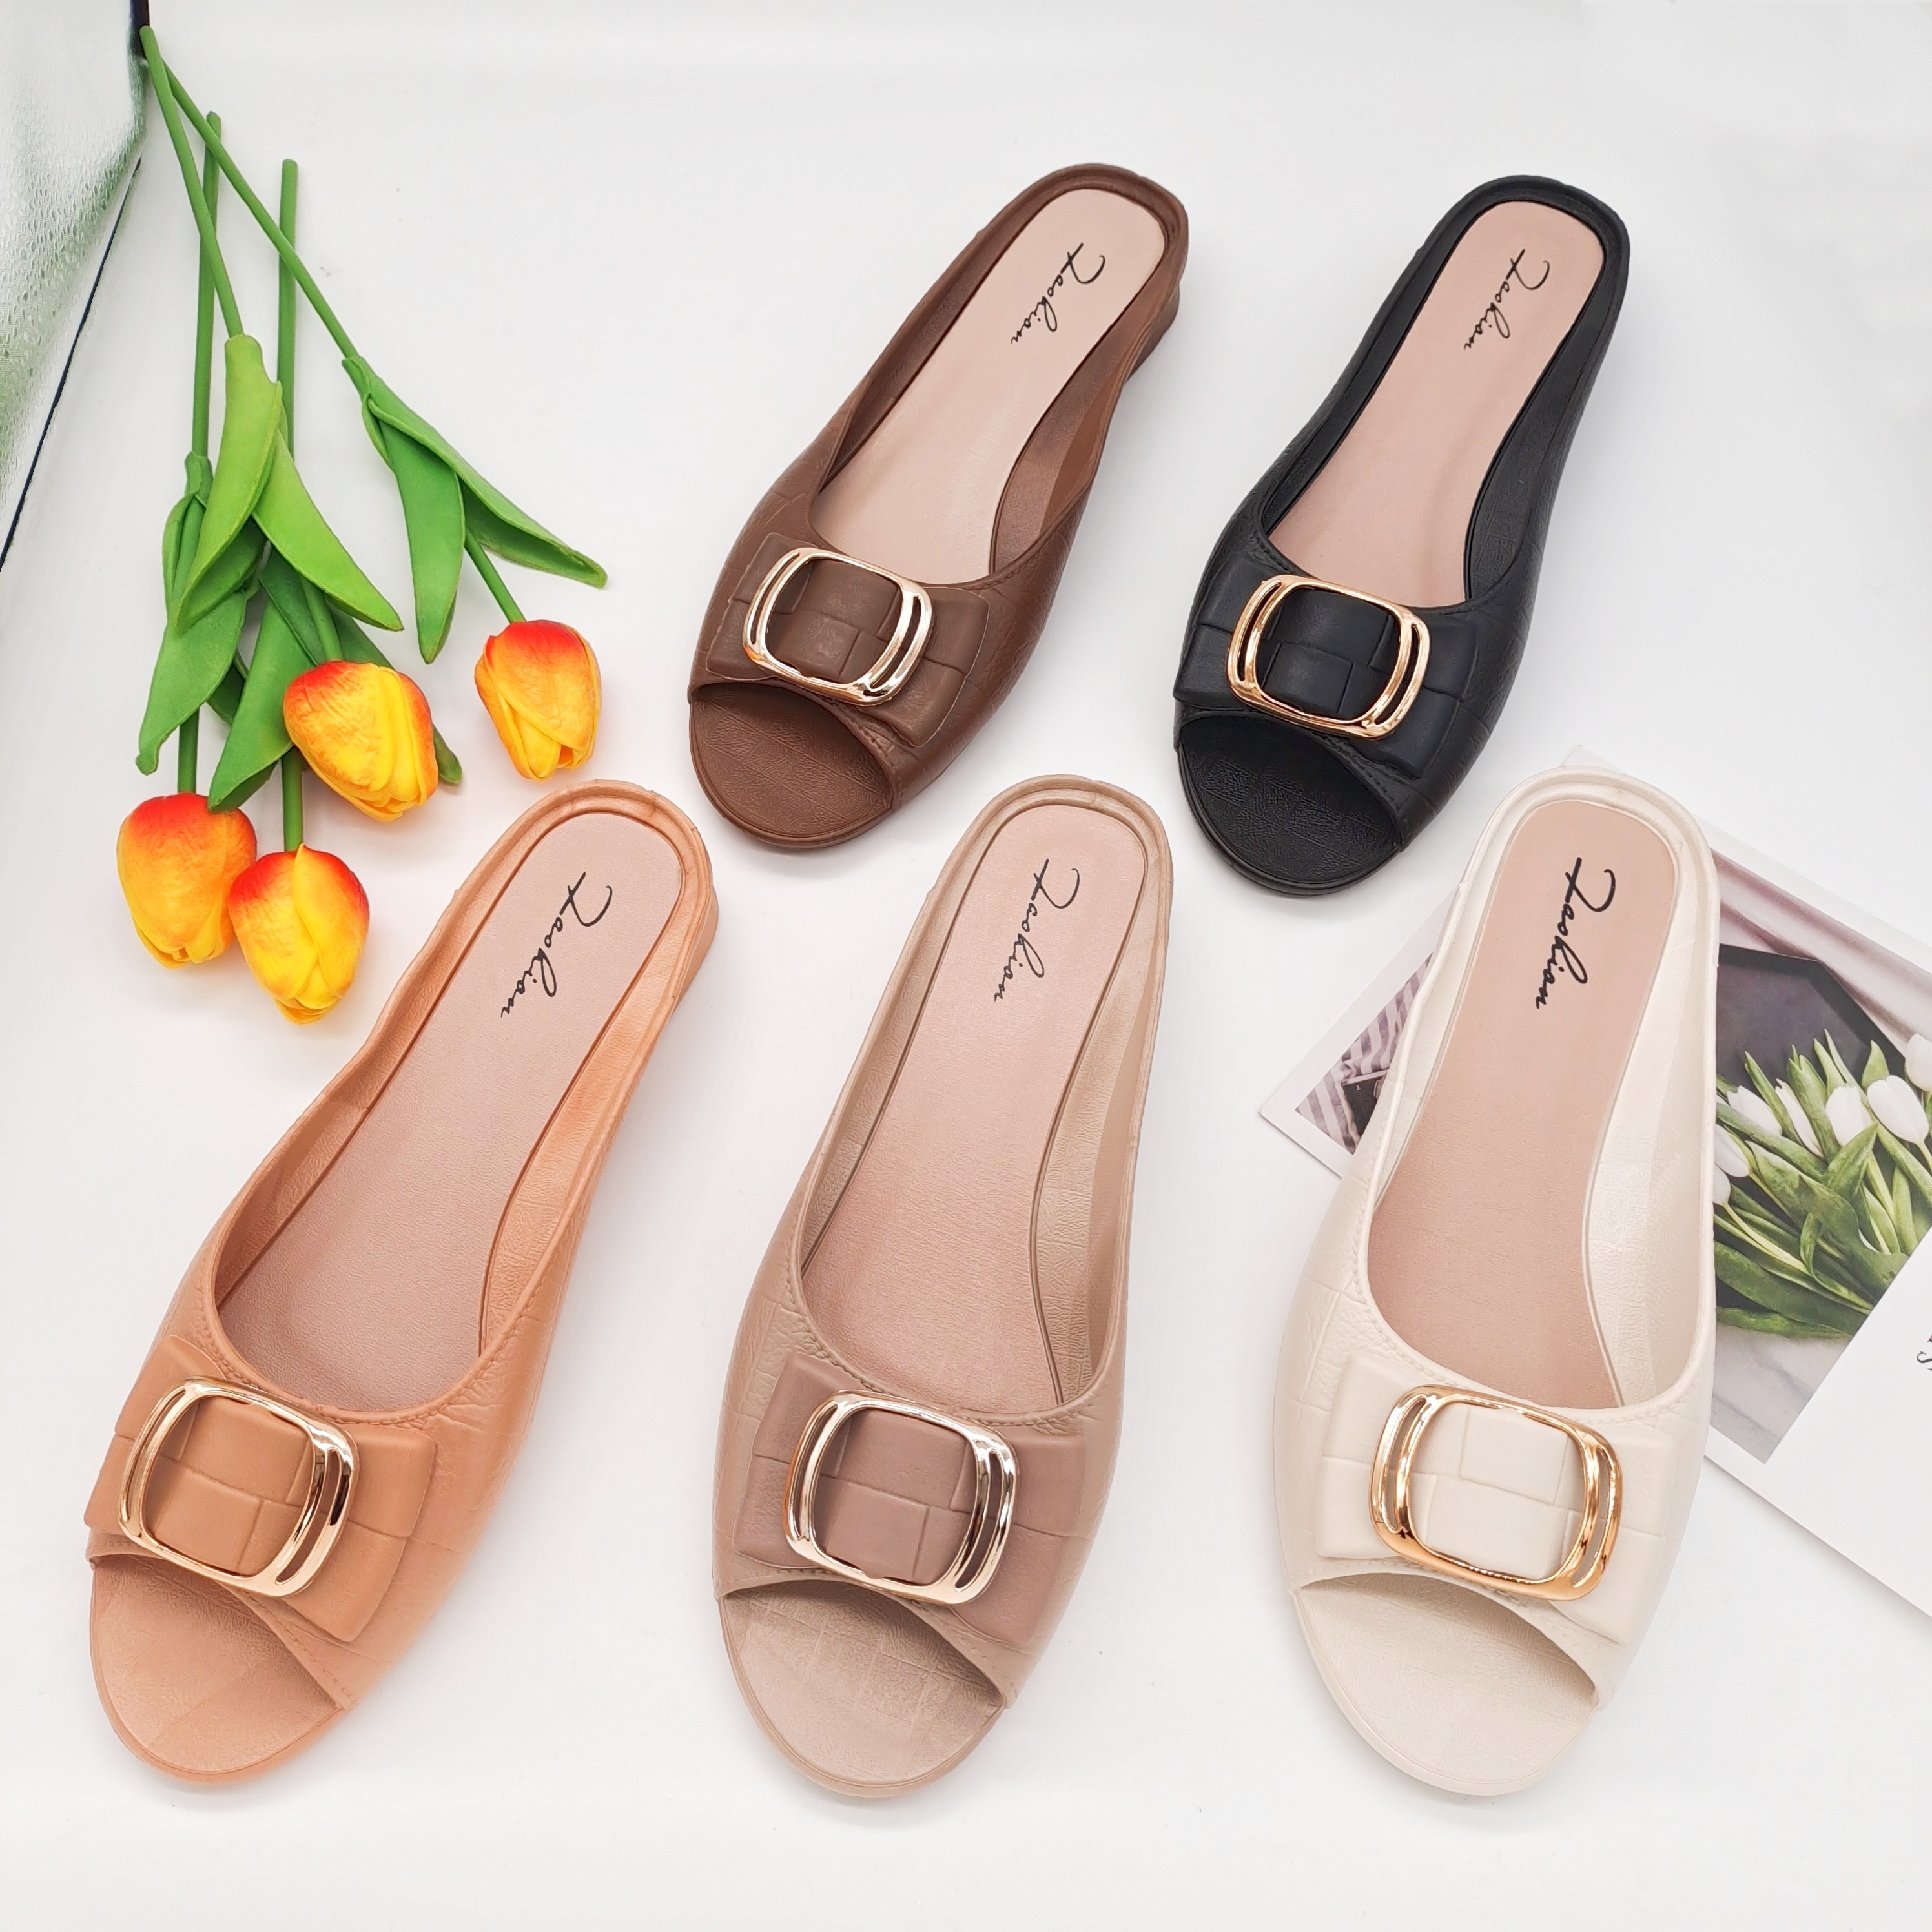 Wholesale 2022 Latest Designer Slippers women Fashion Bow Flat Sandals  Square Toe Cute Ladies slides Slippers From m.alibaba.com